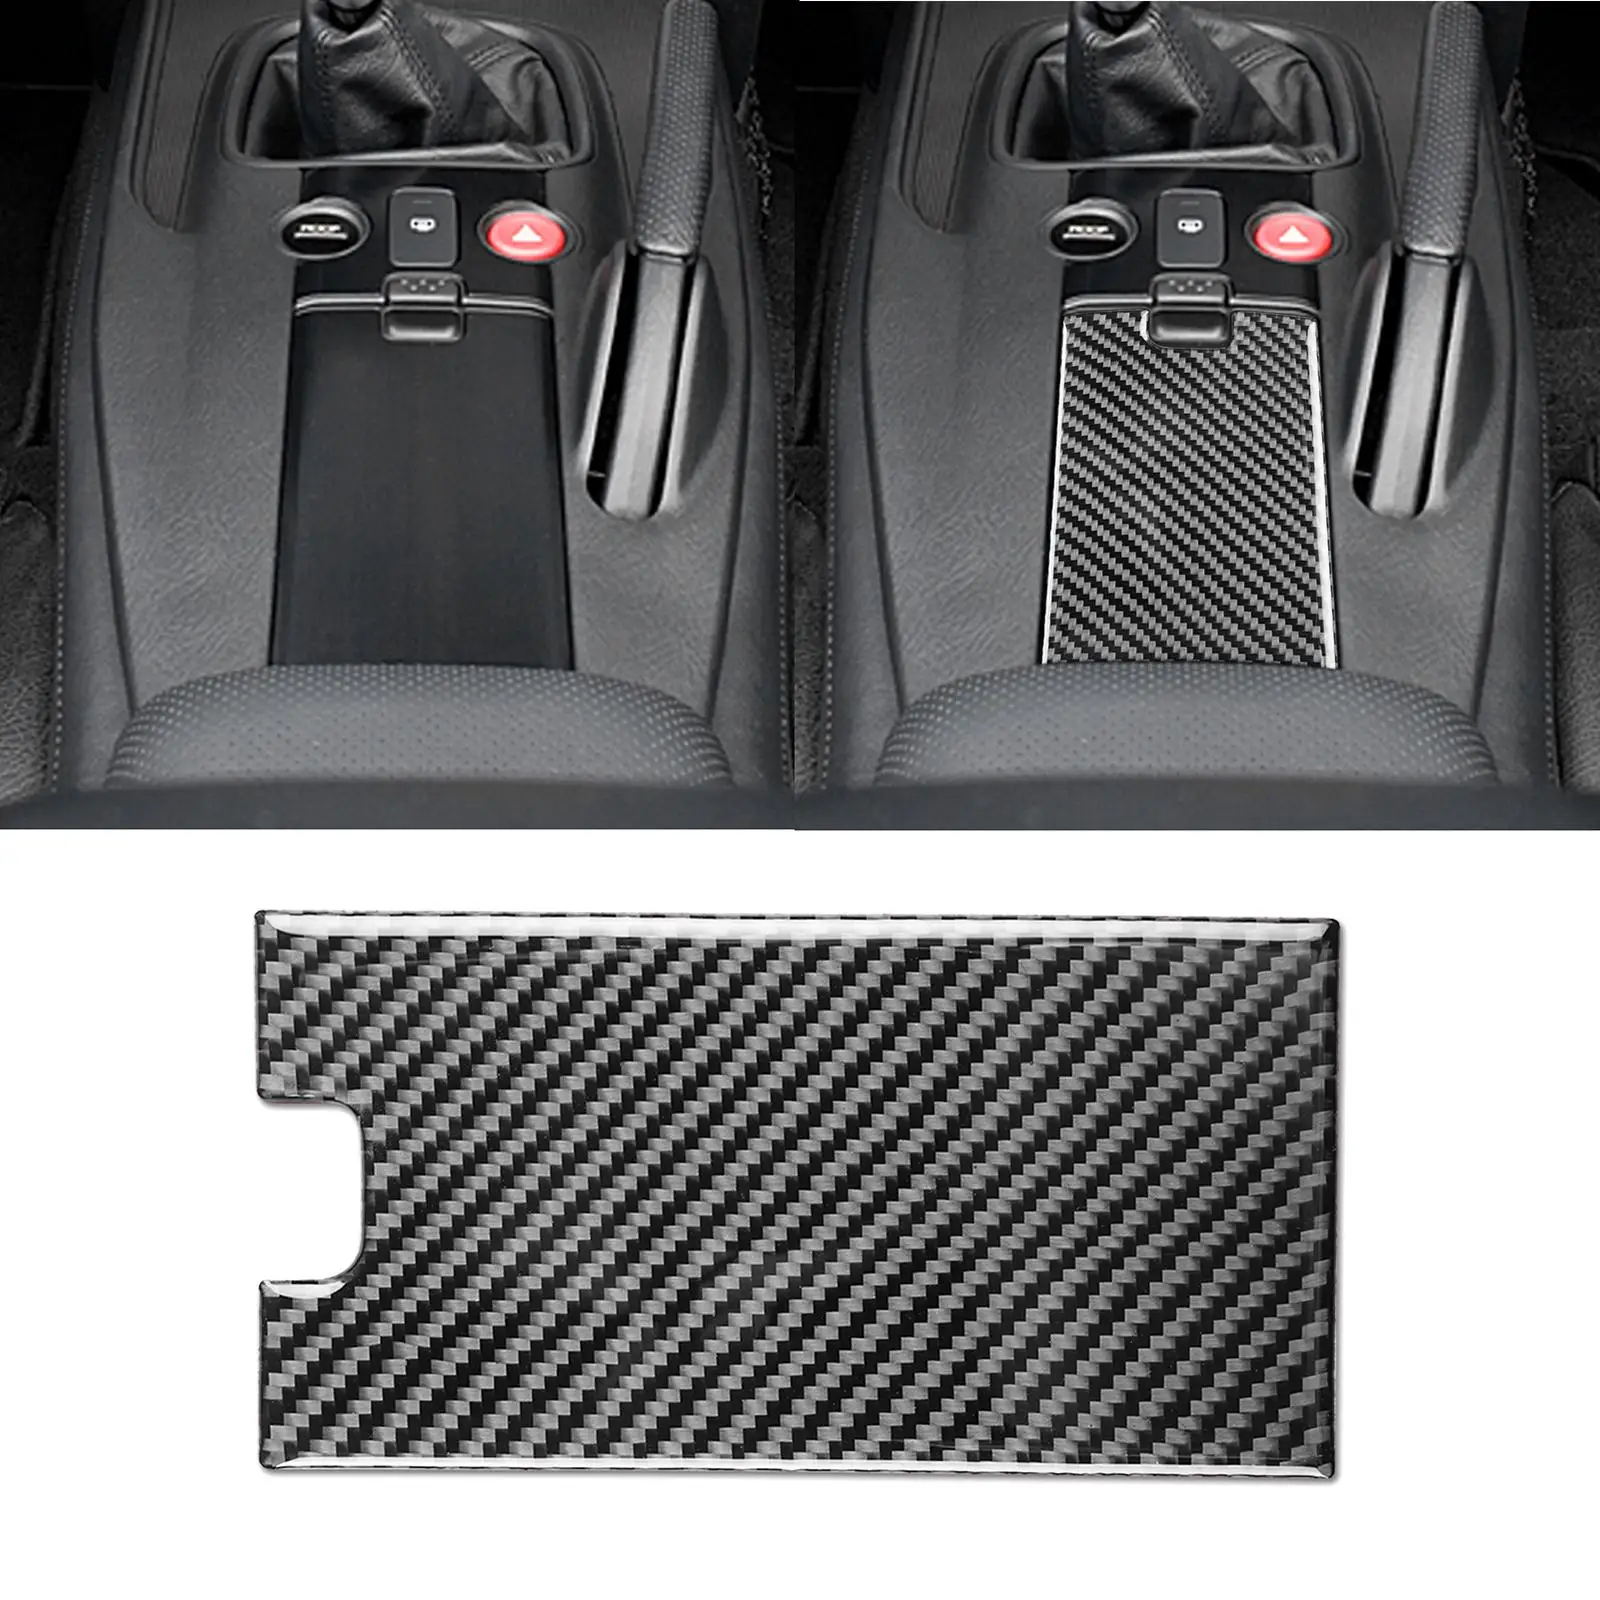 Central Storage Box Cover Trim Body Moldings Trims Replaces Car Accessories for Honda 2004 to 2009 S2000 Stable Performance